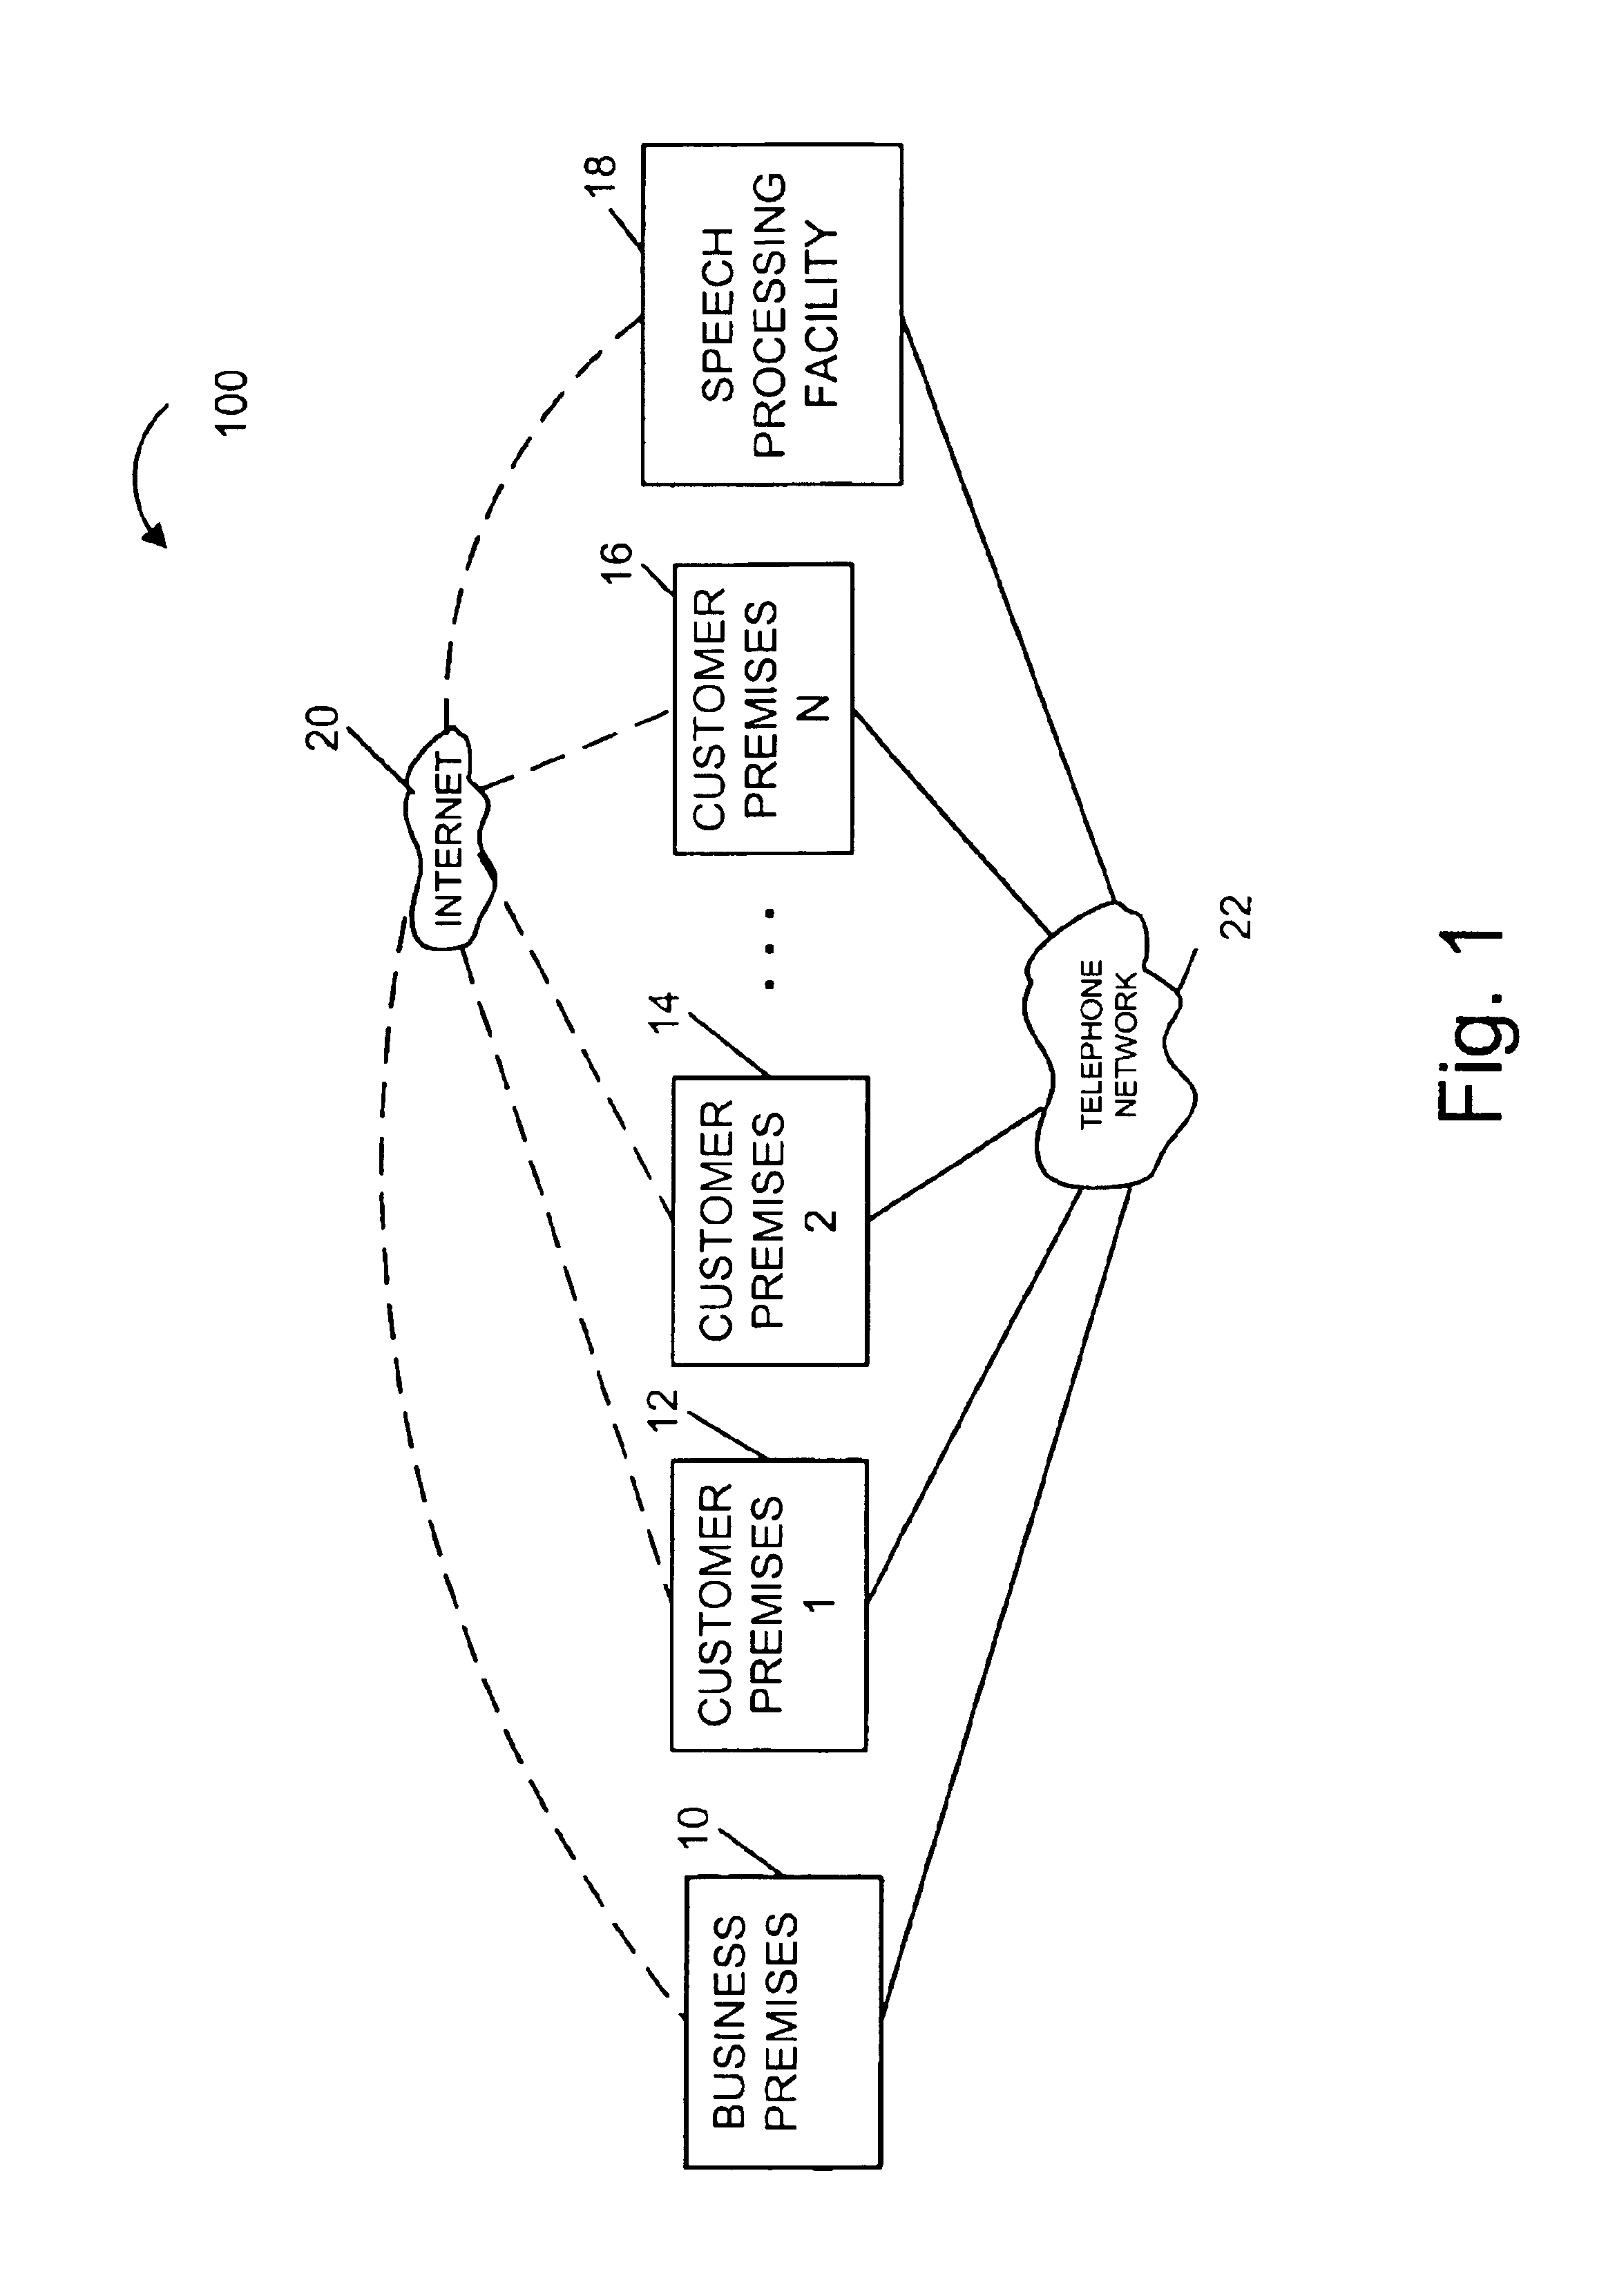 Methods and apparatus for performing speech recognition and using speech recognition results